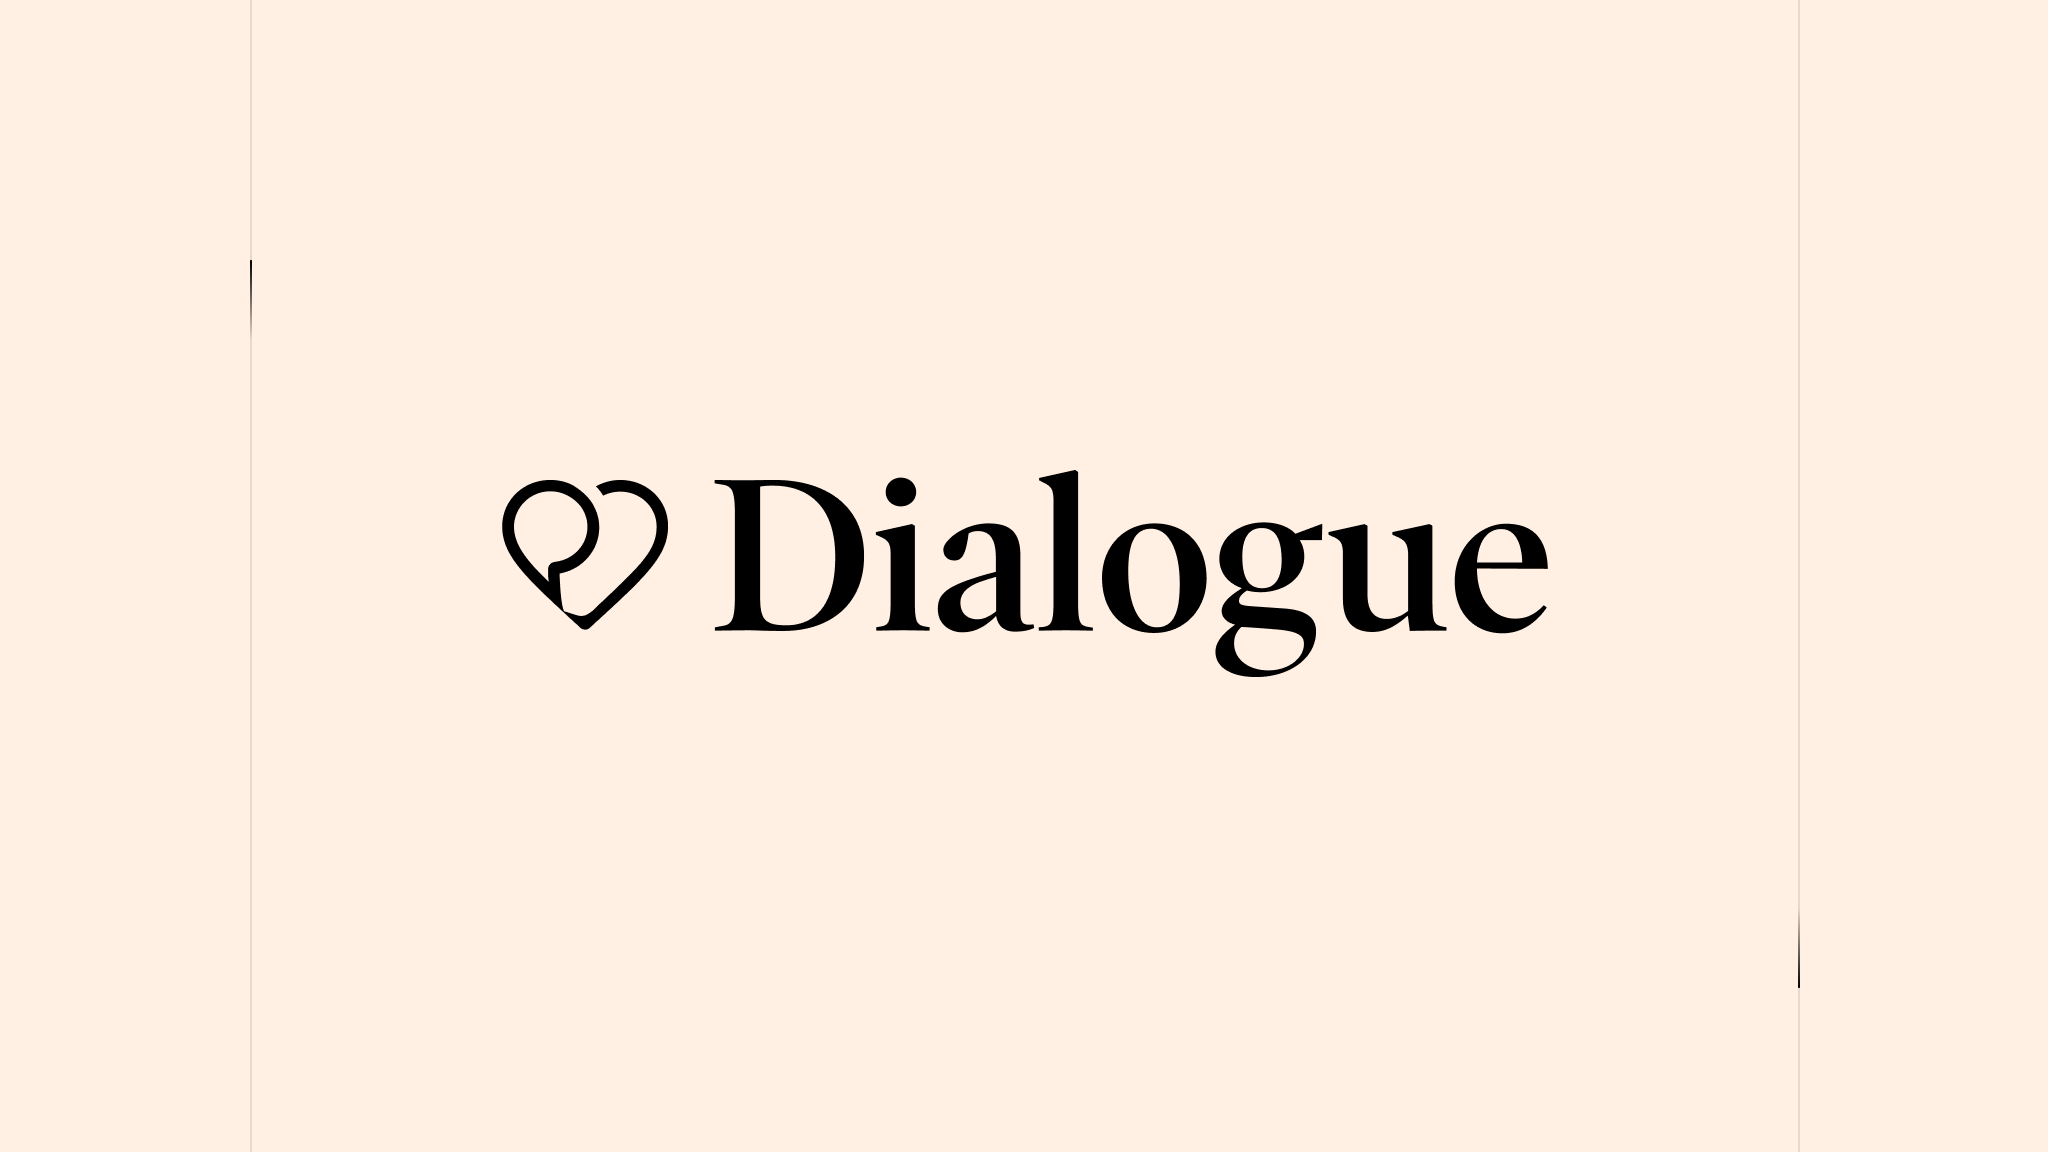 Dialogue made their EMR collaborative to decrease members’ waiting time